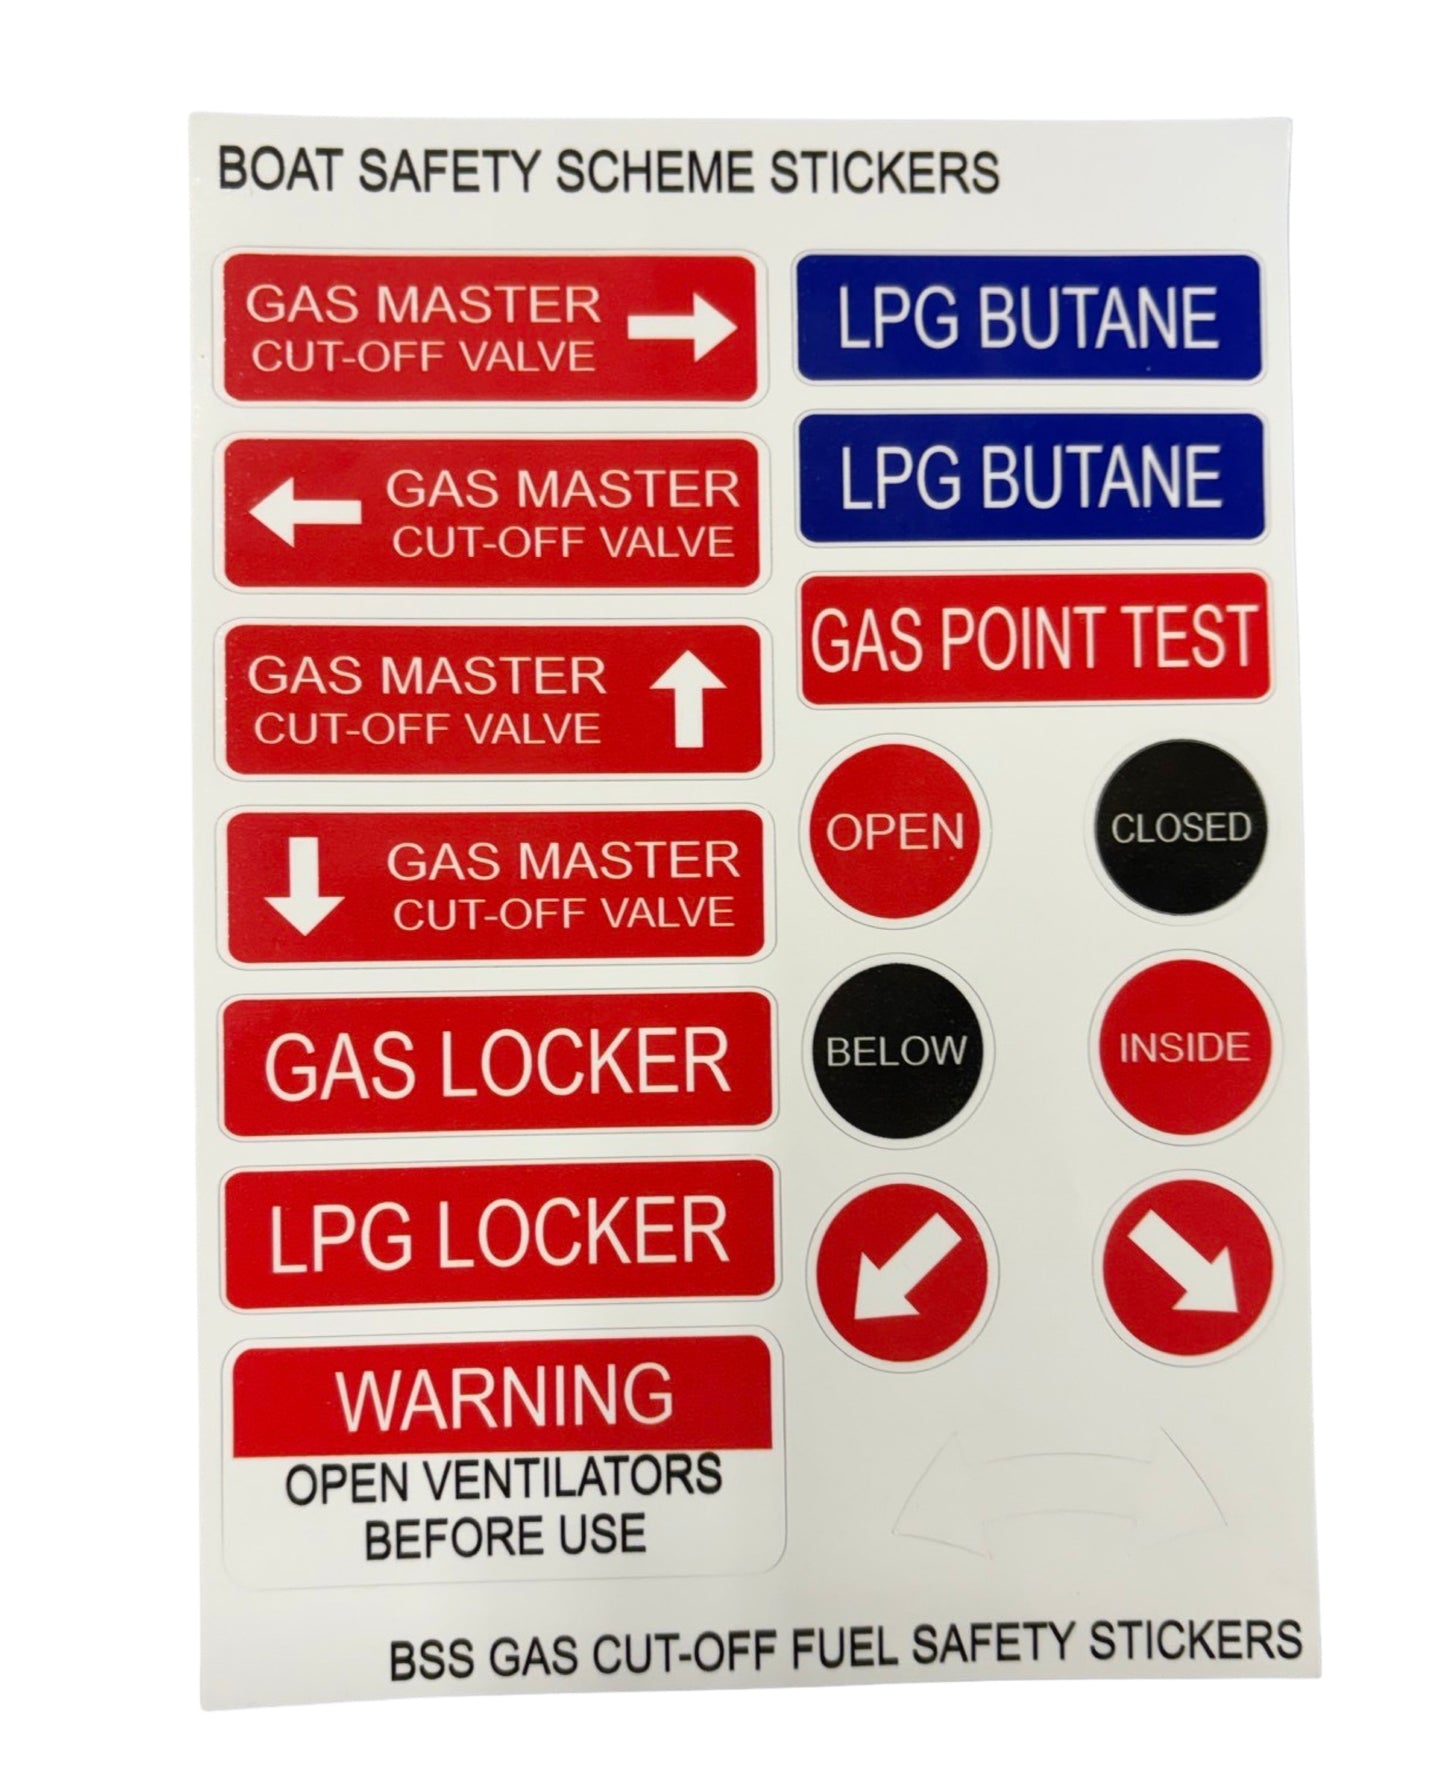 BSS Gas Cut-Off Fuel - Boat Safety Scheme safety stickers (A5 Size)